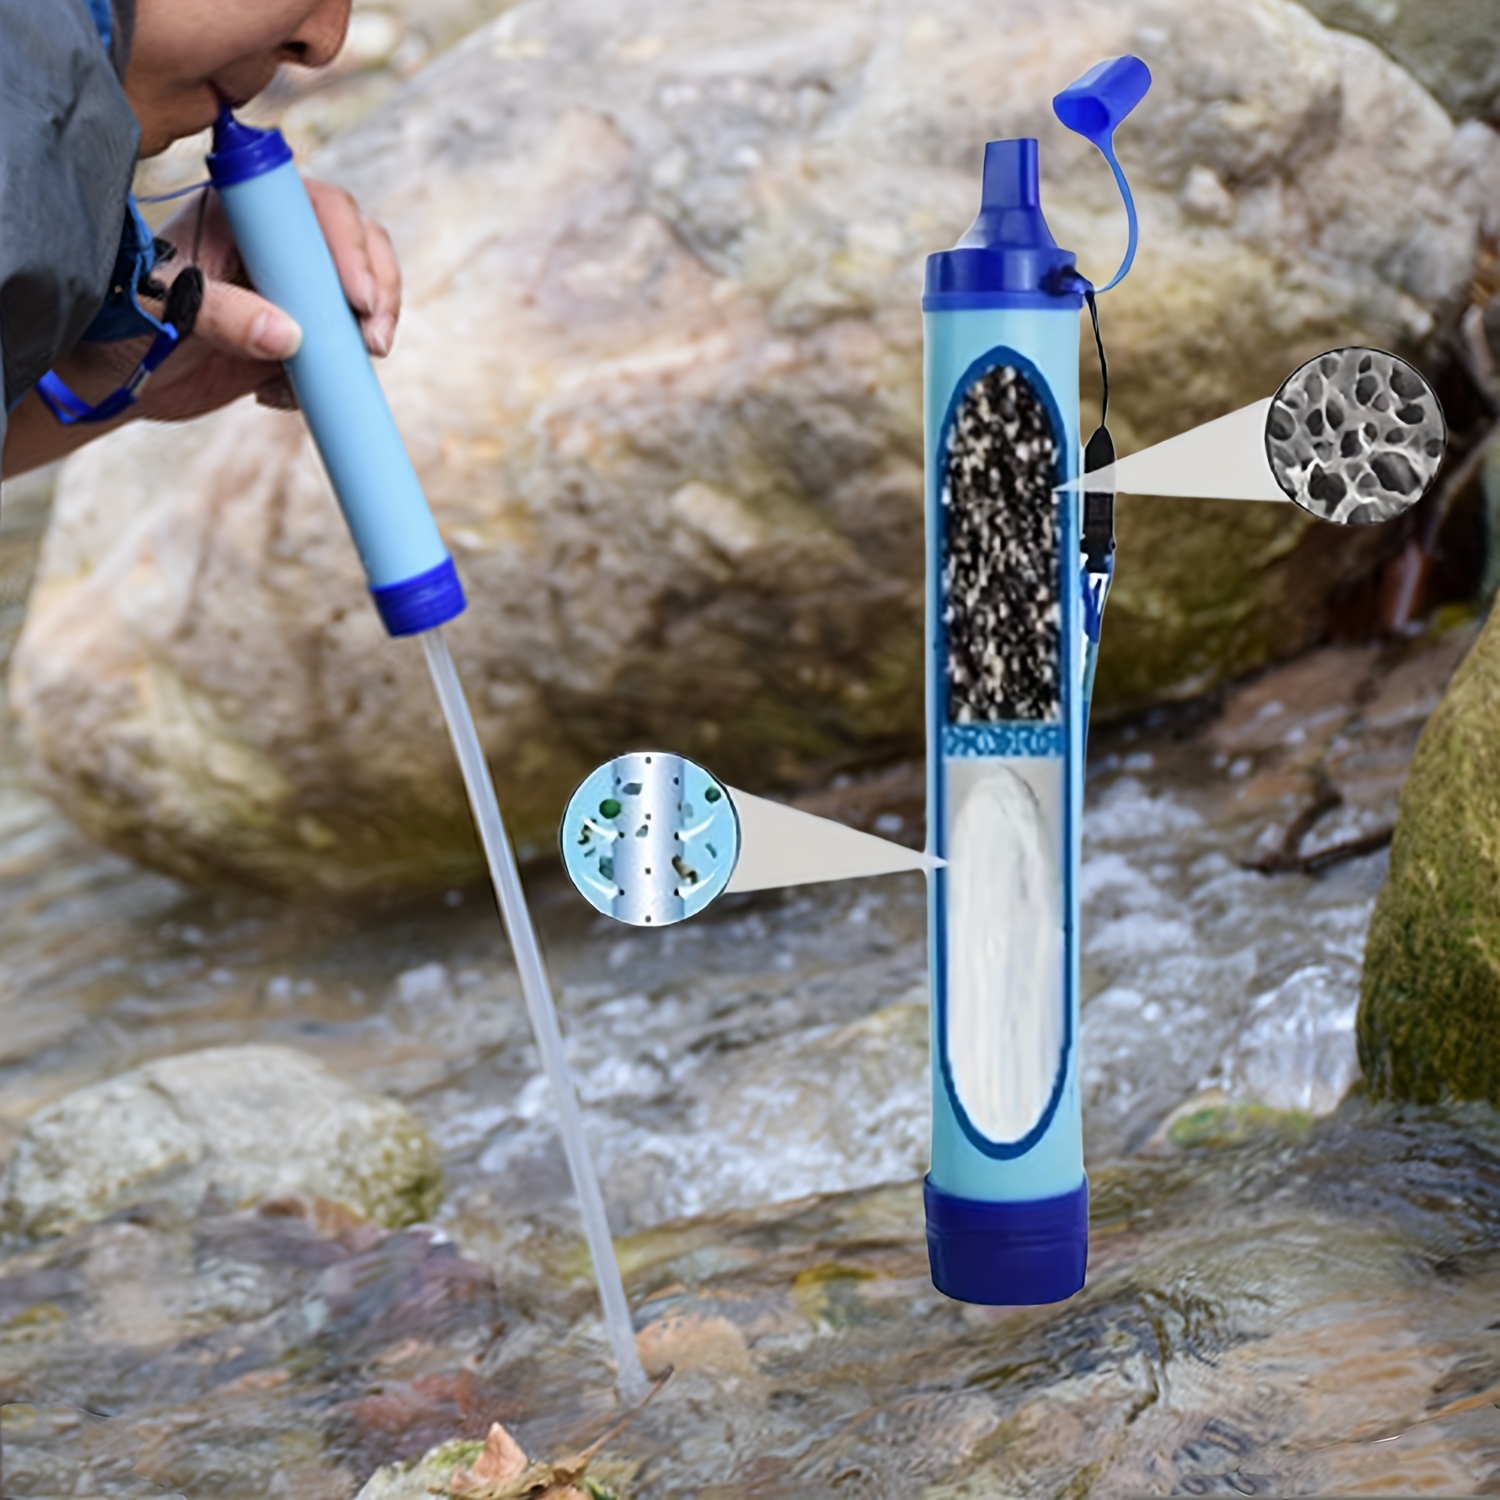 

1pc Portable Water Filter For Hiking, Camping, Travel, And Emergency Survival, Outdoor Activities, Backpacking